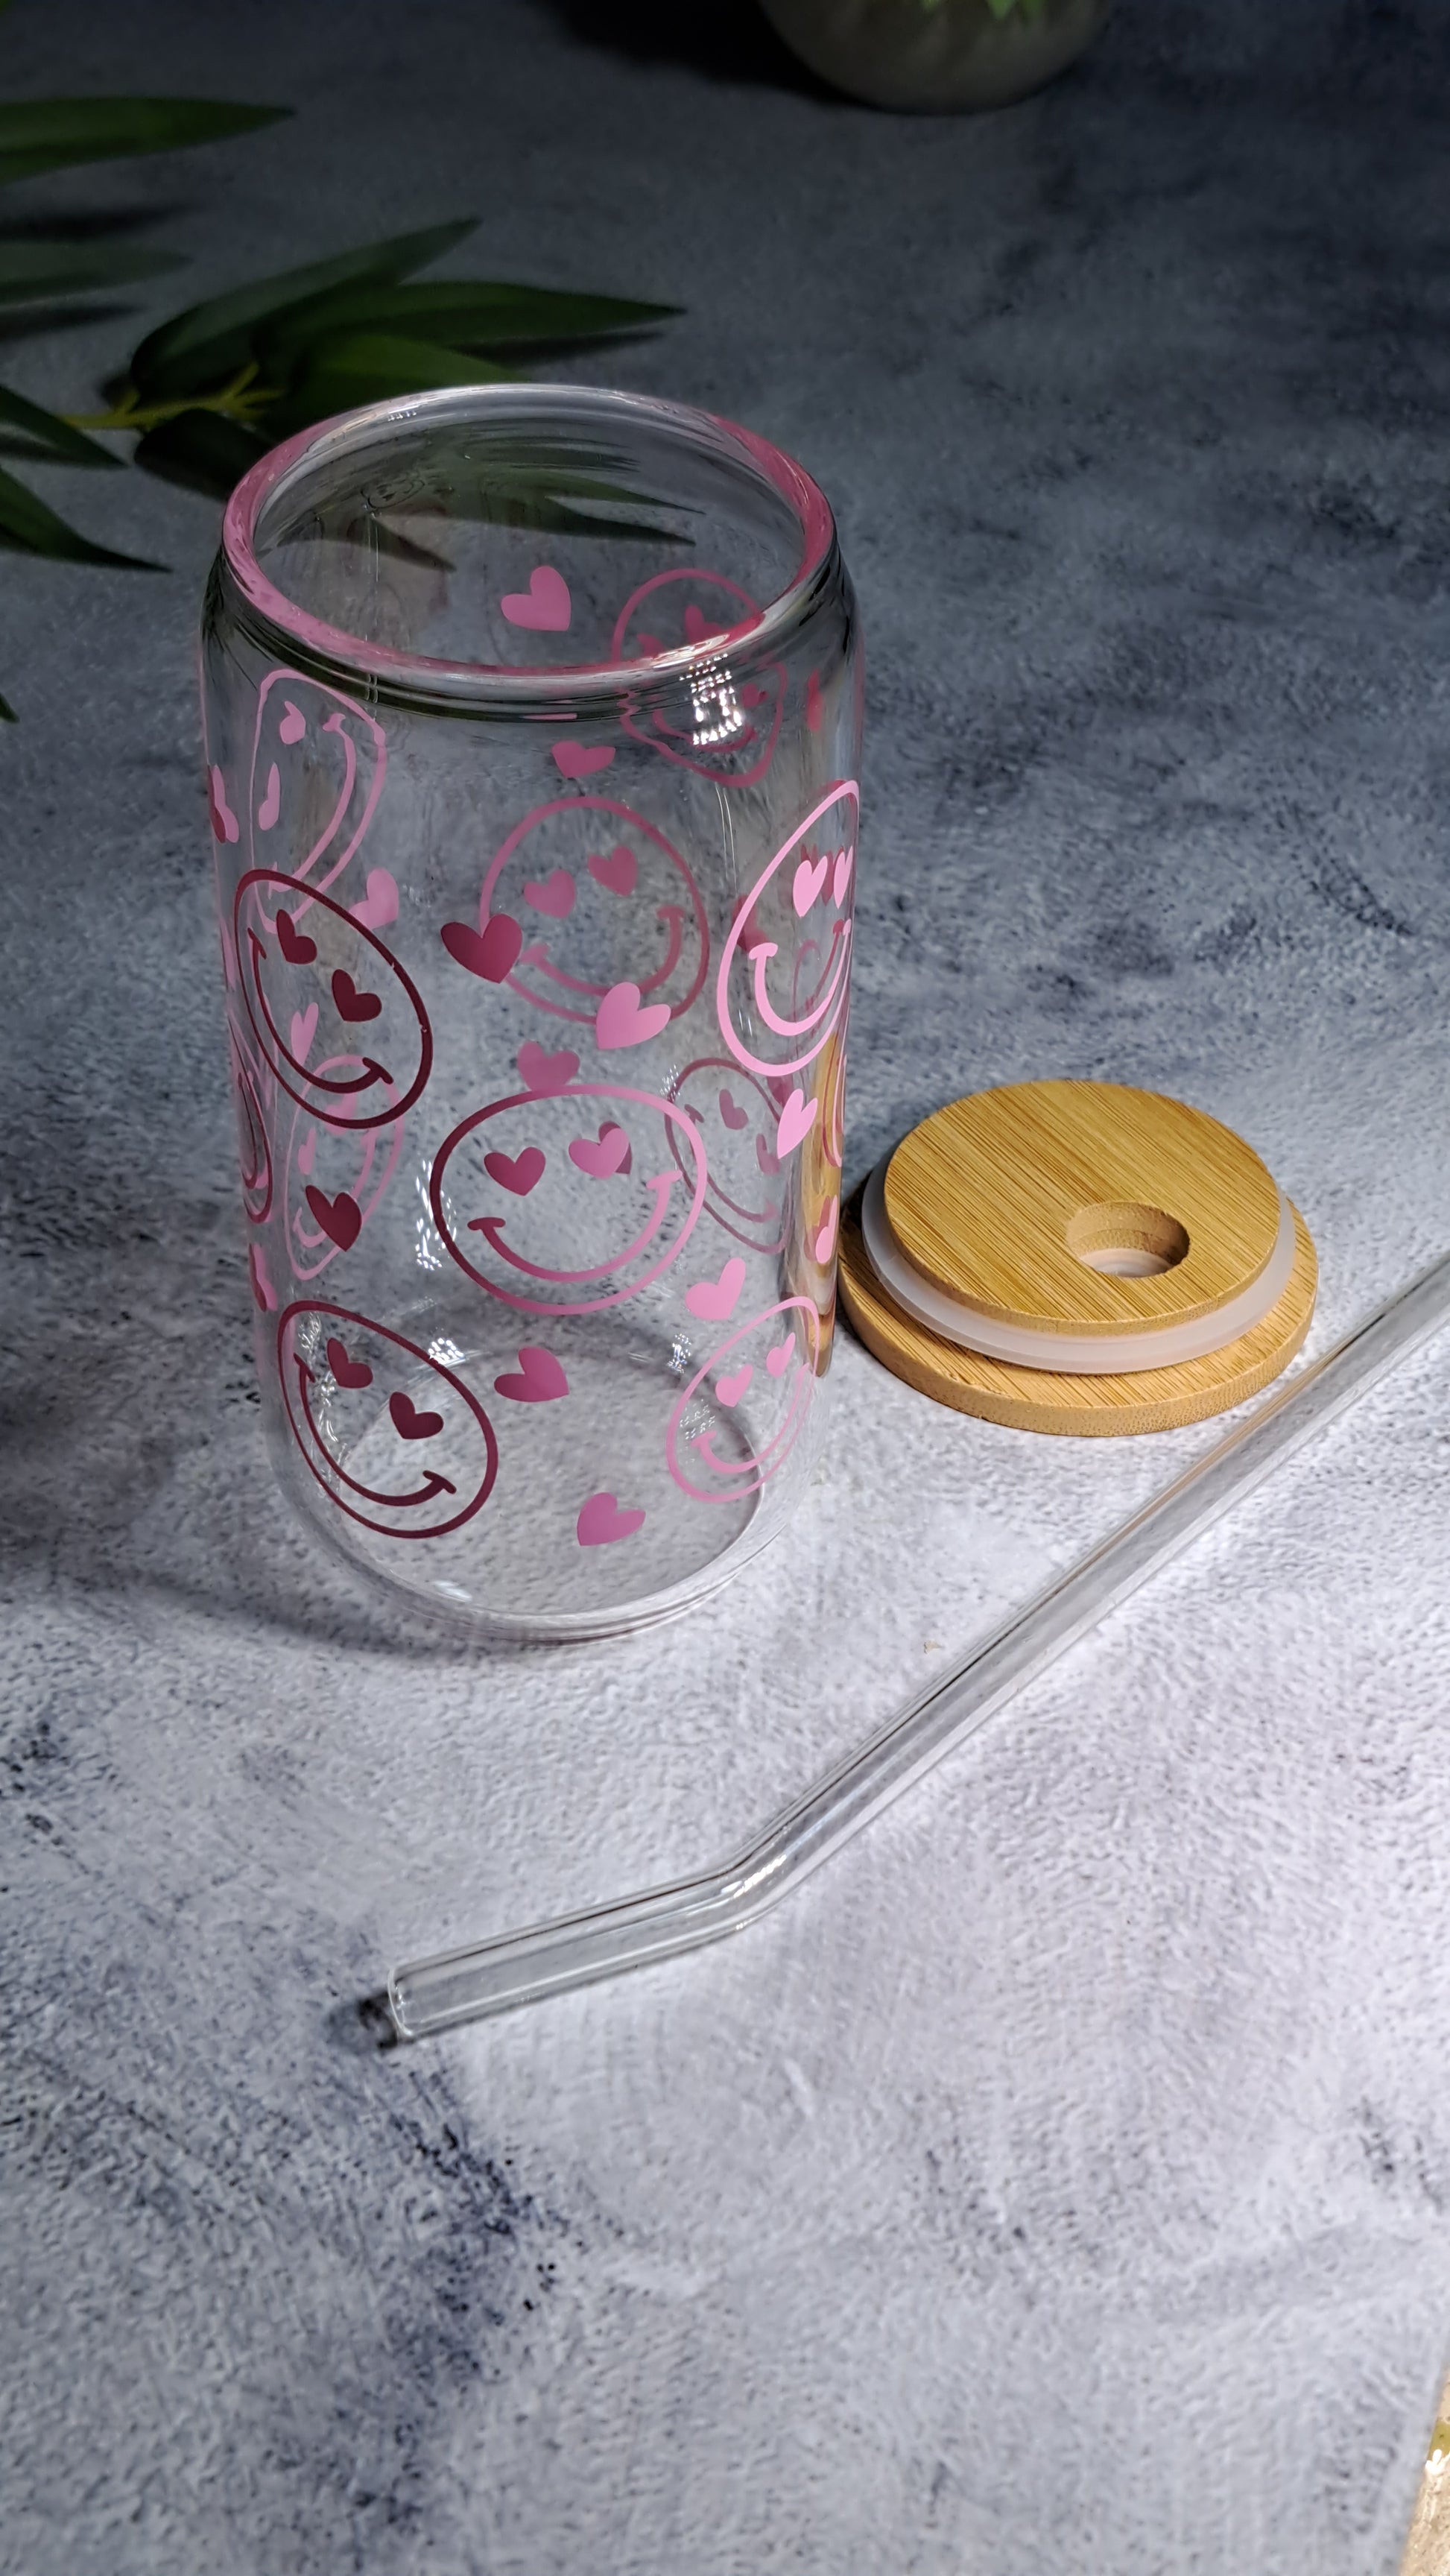 Pink Smiley Cute Iced Tea Drinking Glass with Bamboo Lid and Glass Straw - 500ml. Perfect for birthdays, housewarming gifts, tea sets, graduations, weddings, bachelorette parties and Christmas gifts.